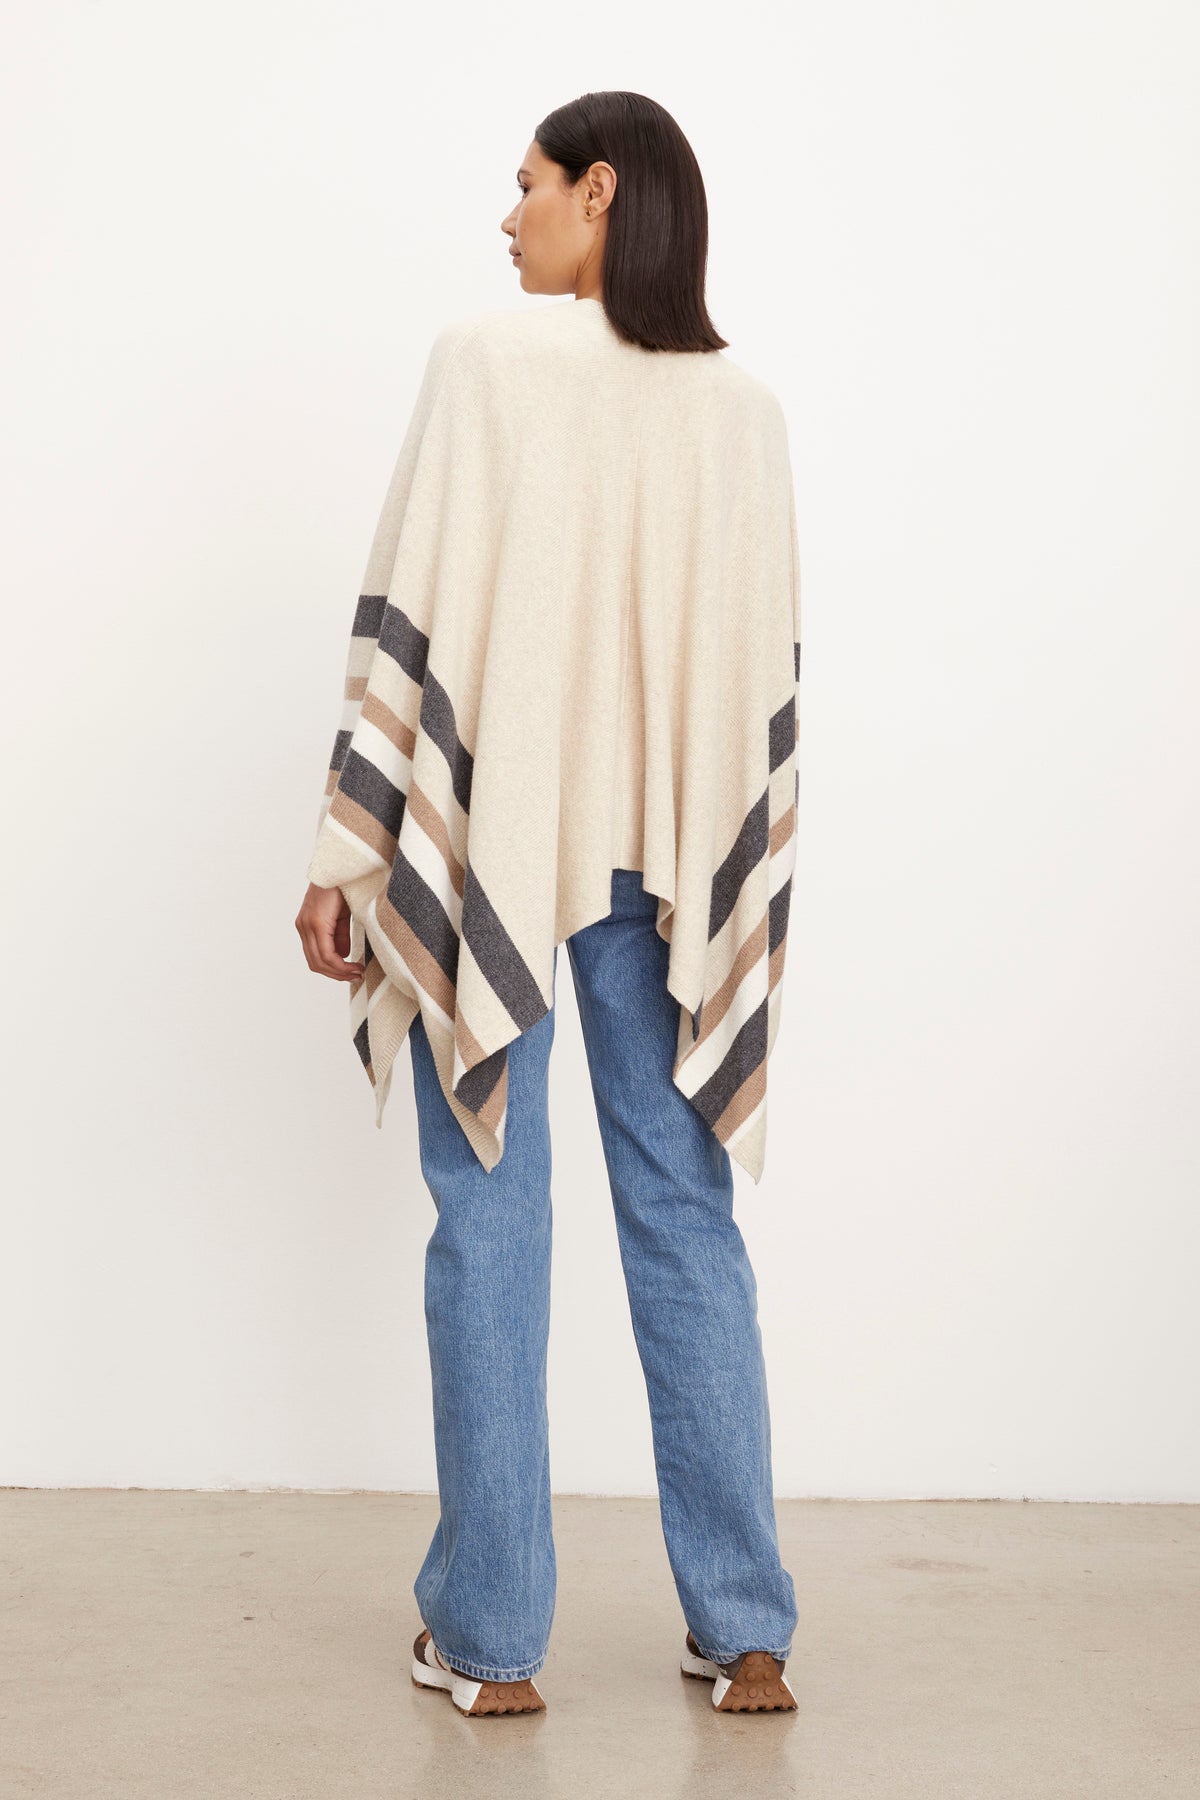 The back view of a woman wearing jeans and a Velvet by Graham & Spencer HARPER OPEN FRONT PONCHO.-26897793024193